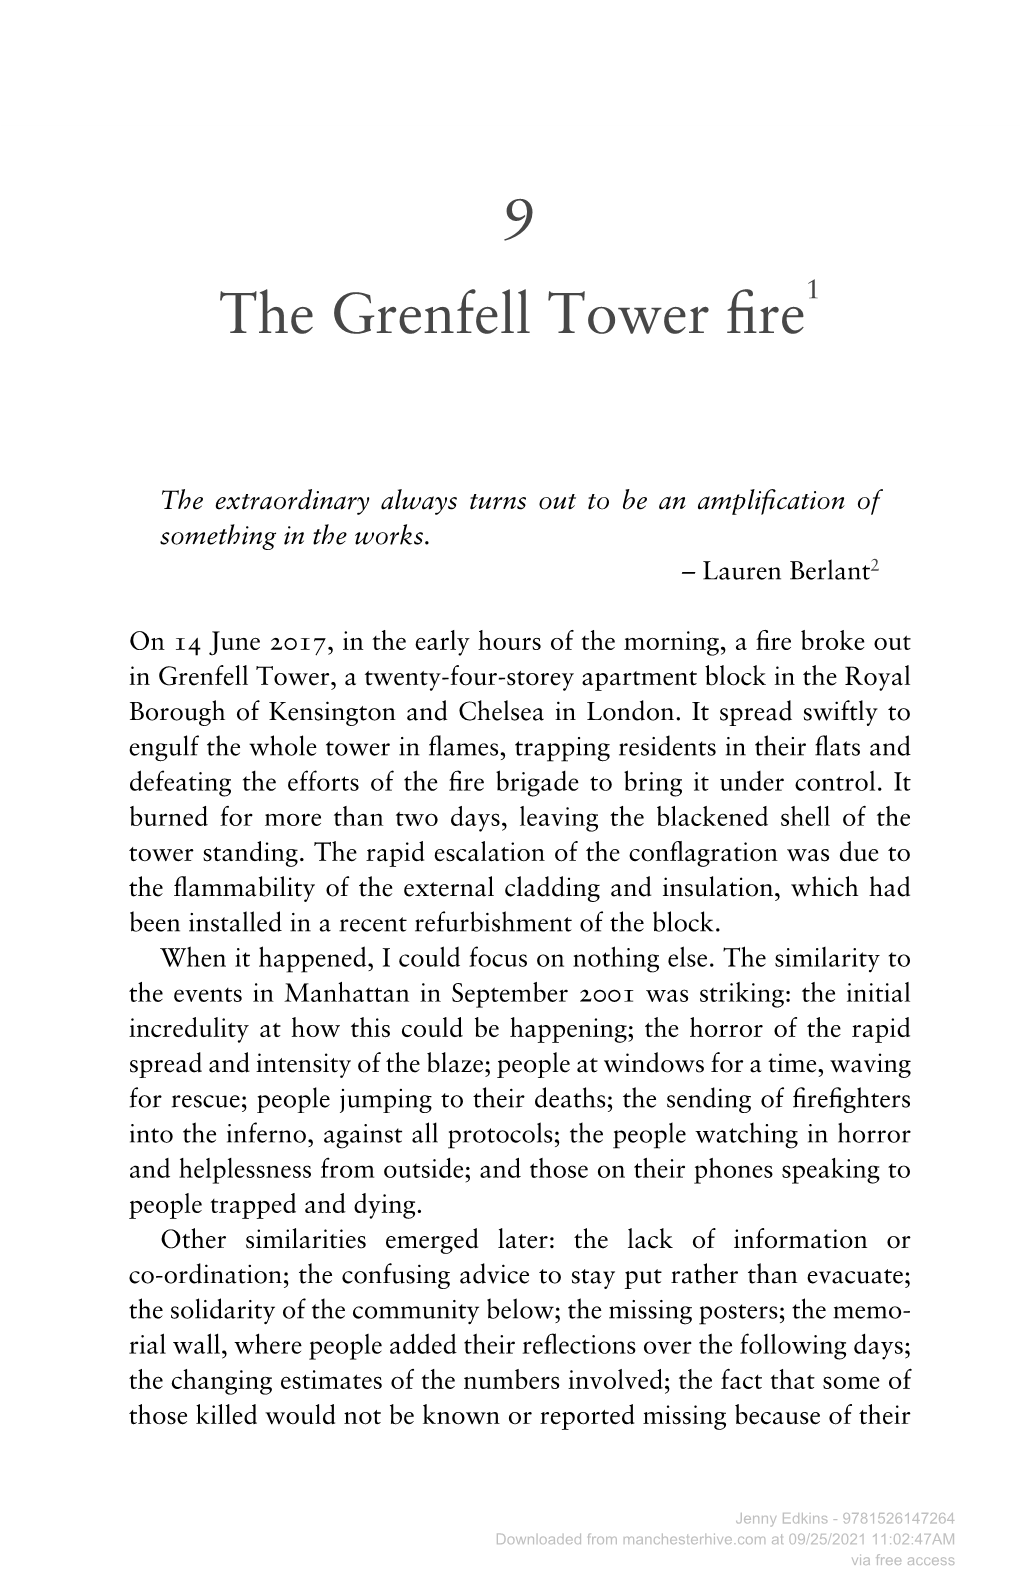 The Grenfell Tower Fire1